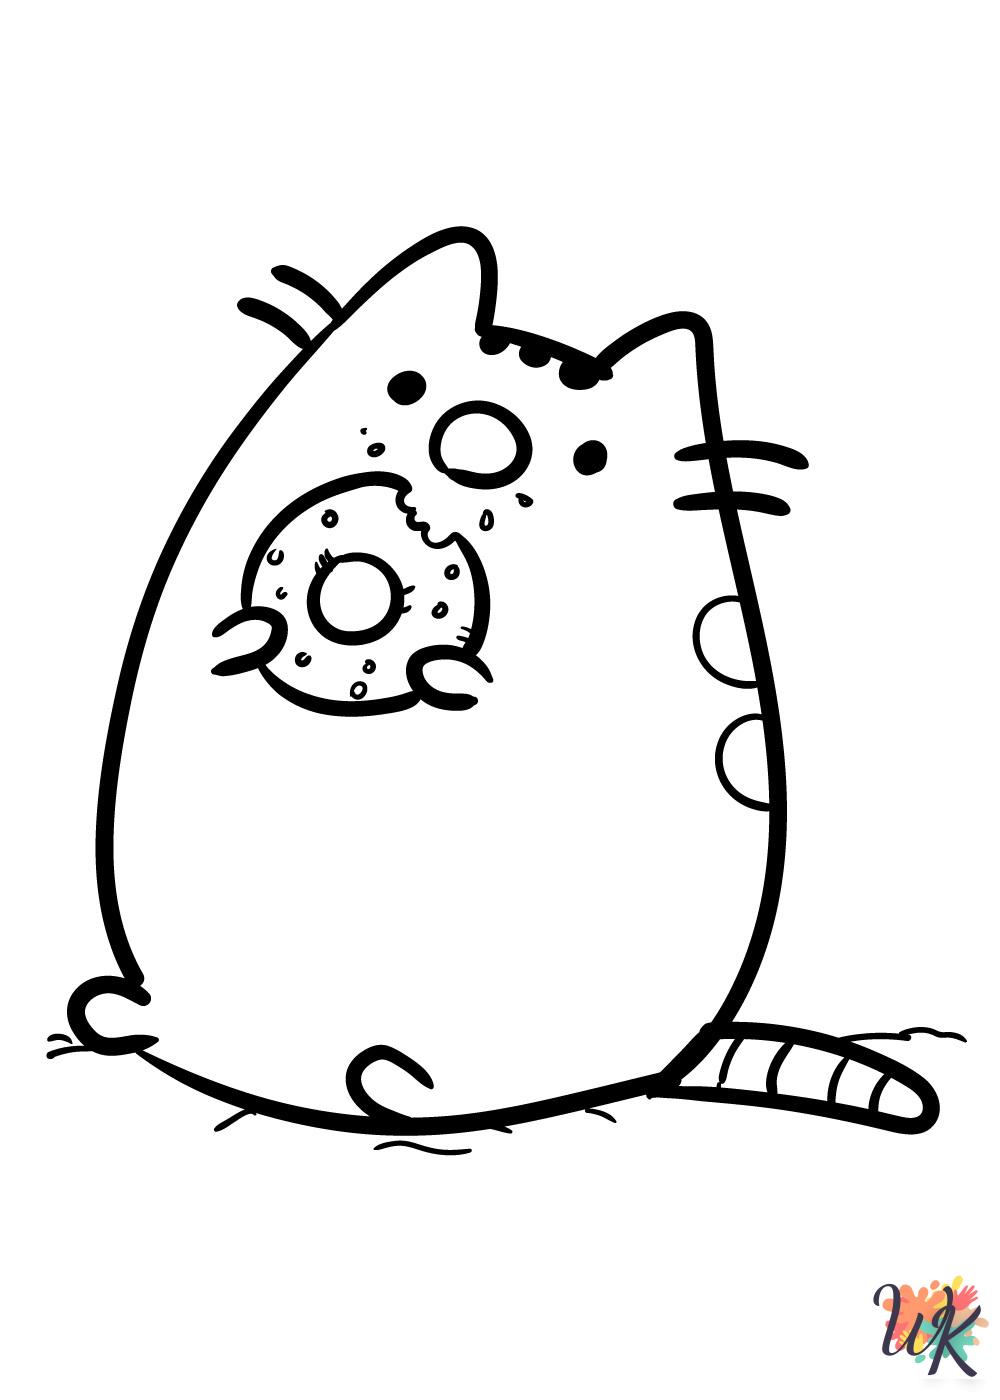 Pusheen decorations coloring pages